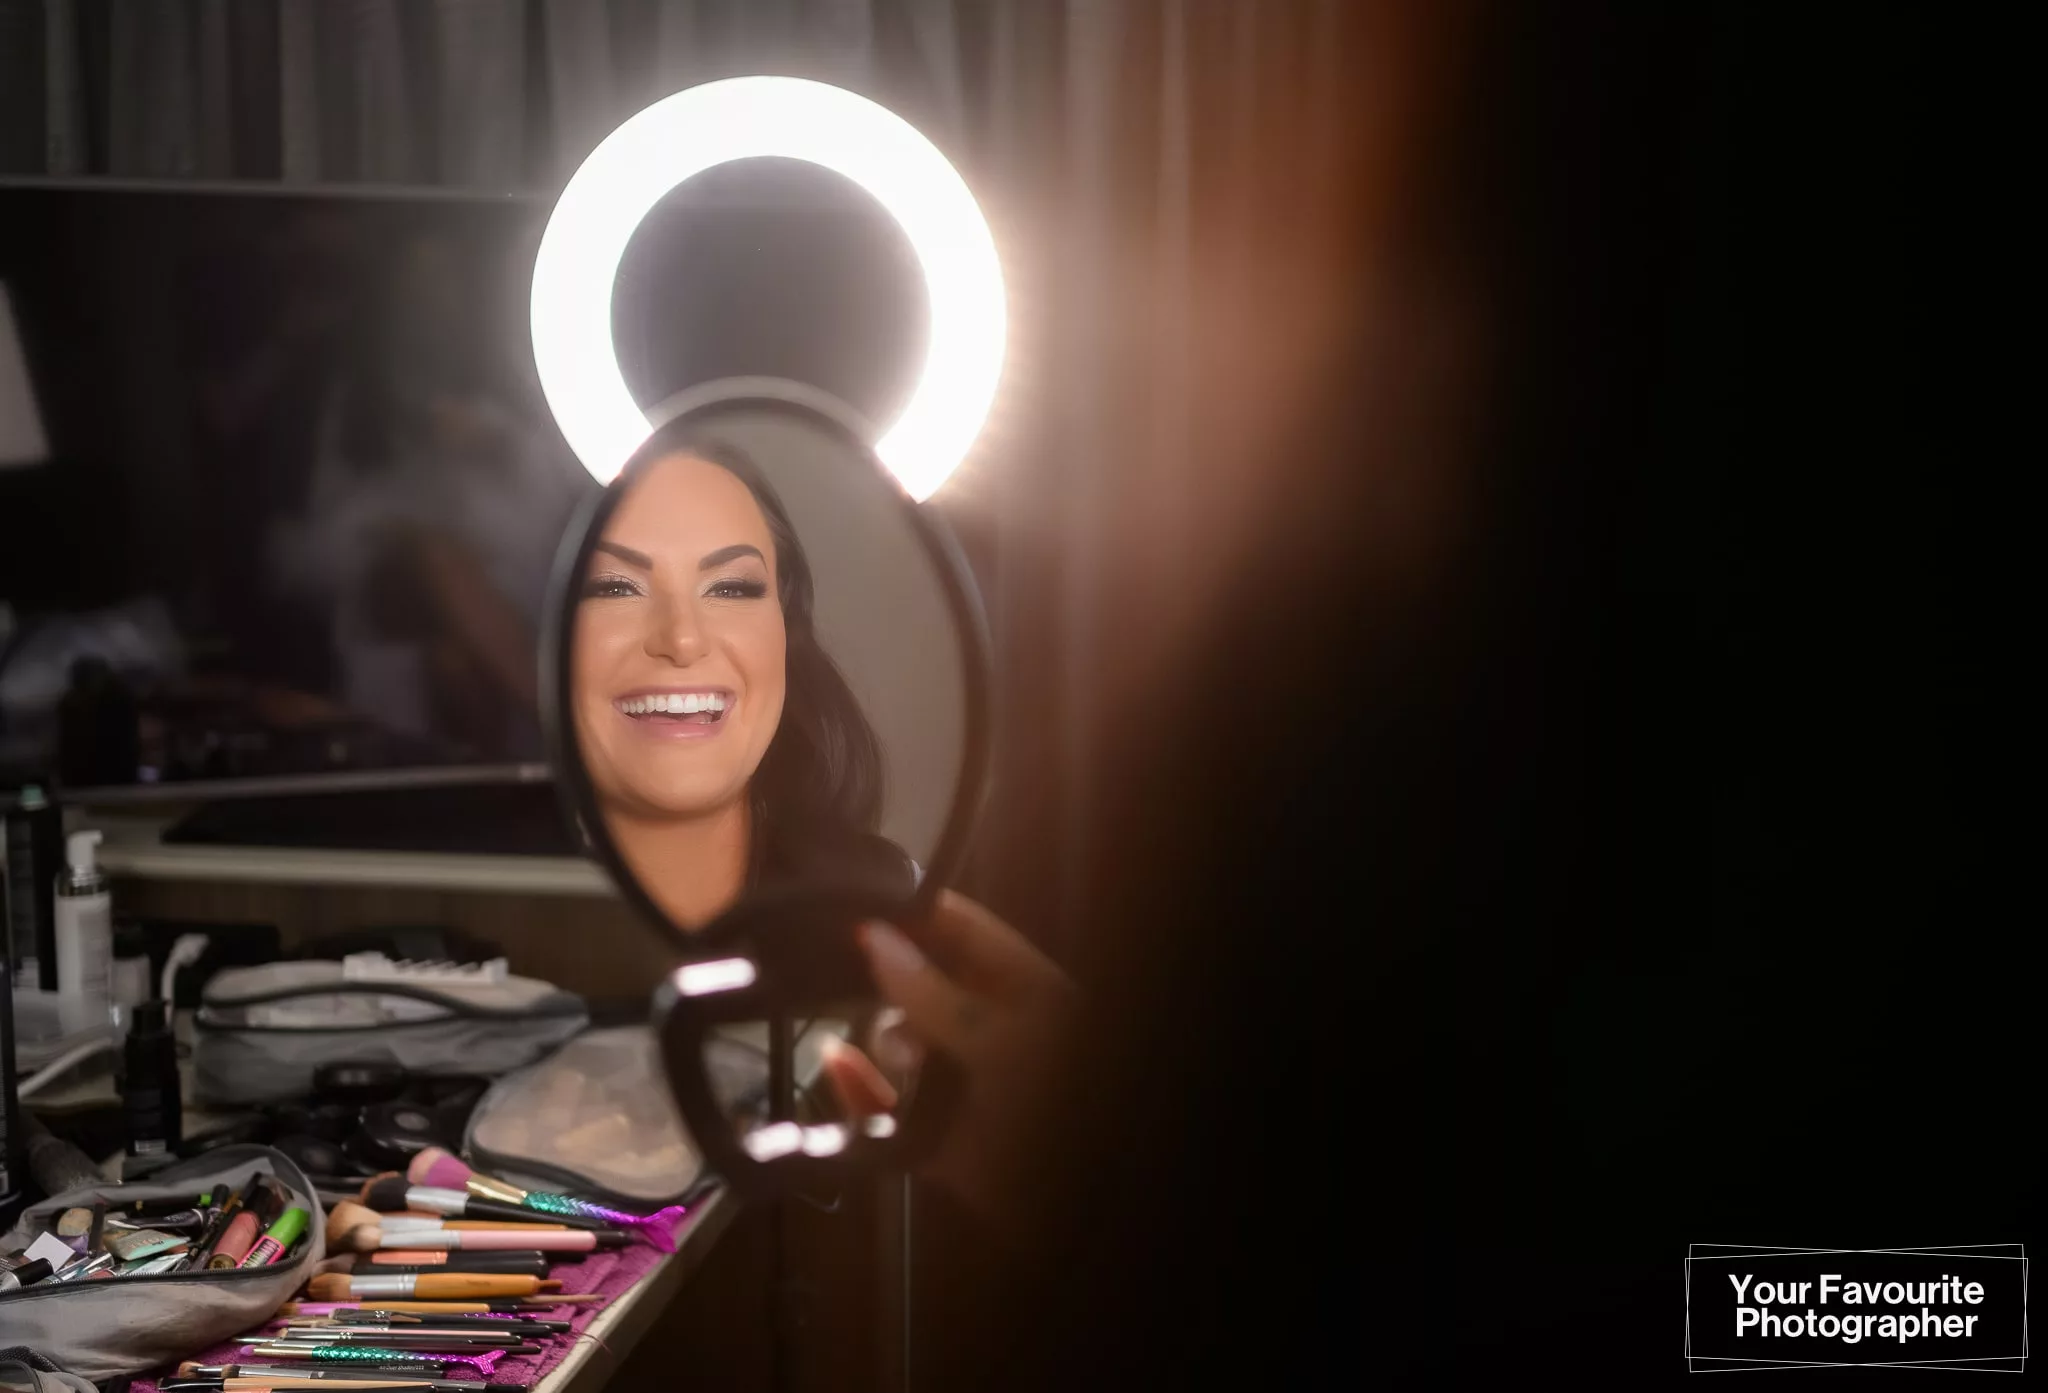 Bride Sam looks in the mirror while getting her makeup done with a ringlight